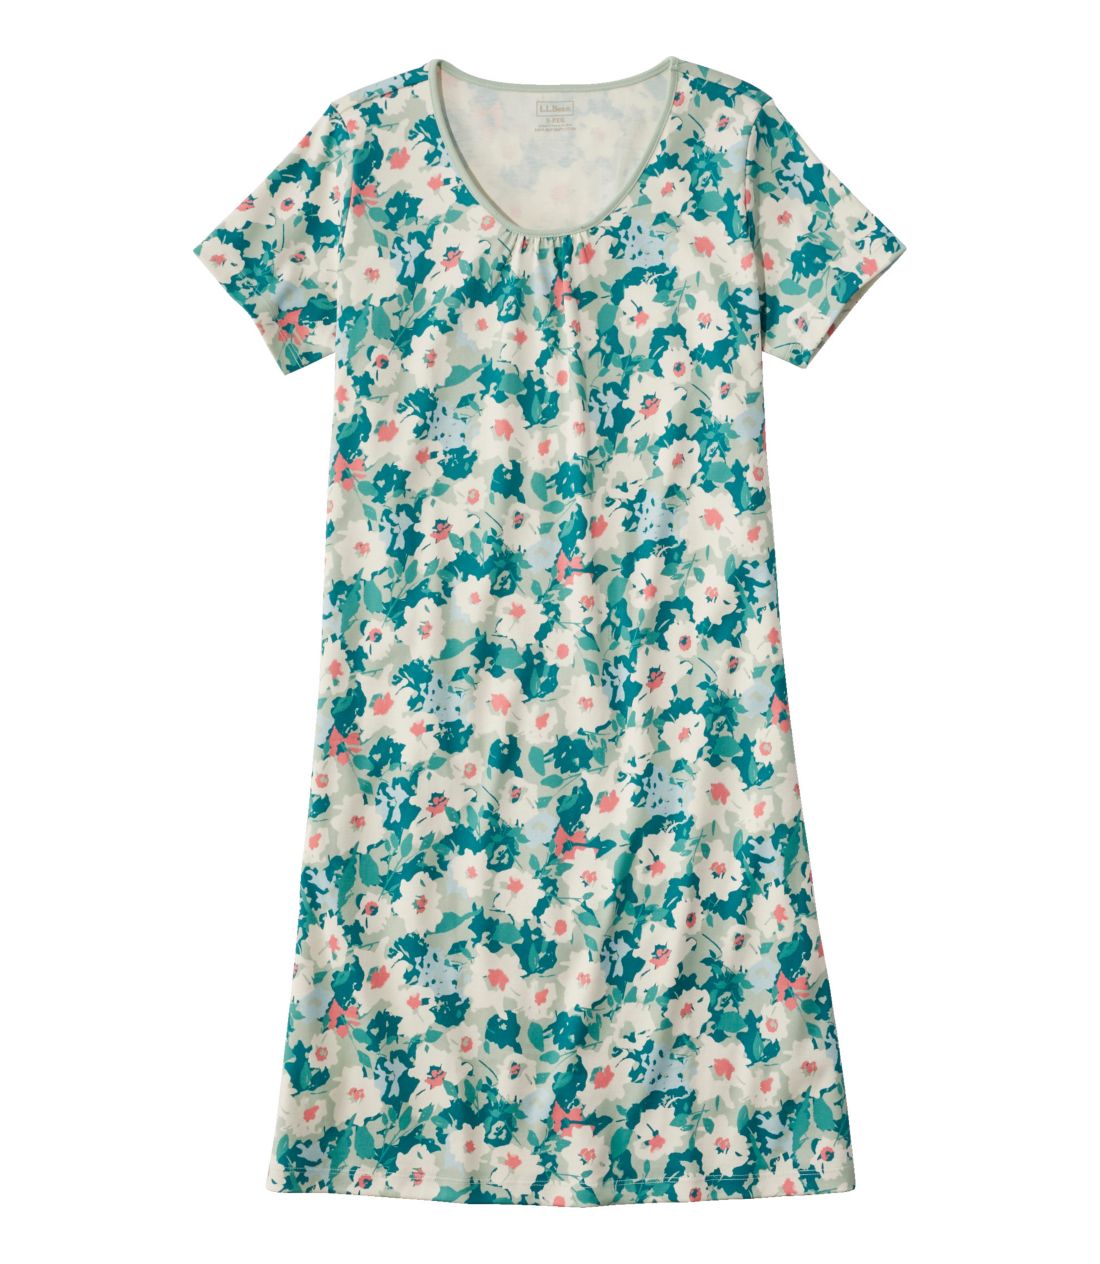 X[s}EiCgKEA@t[^Women's Supima Nightgown, Short-Sleeve Floral